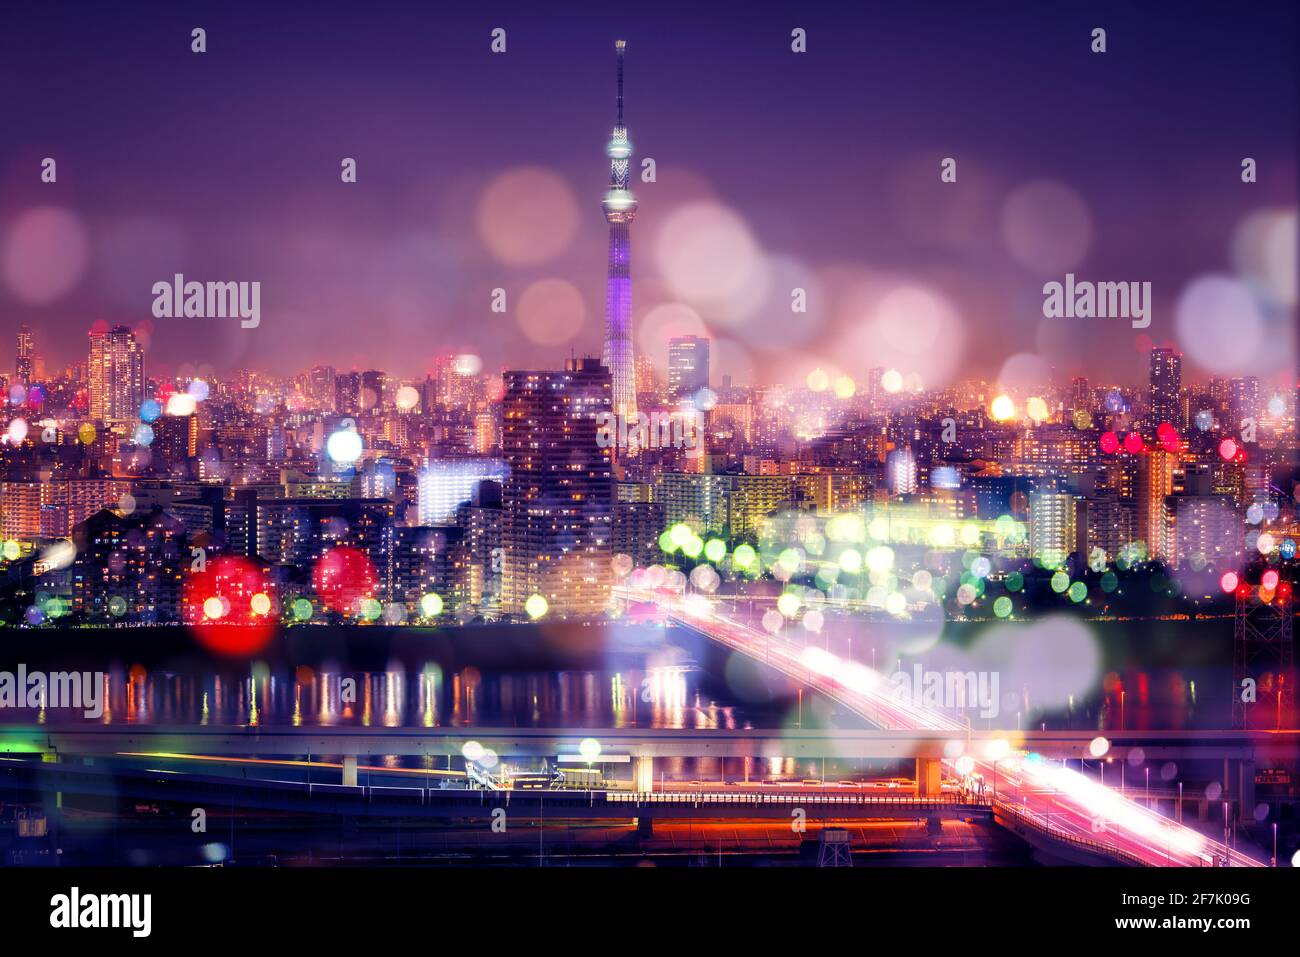 Nightlife in Tokyo. Tokyo Sky Tree with Blur Bokeh Lights Decoration in Colorful Filter. Tokyo Cityscape Background. Night sky and nightlife concept Stock Photo